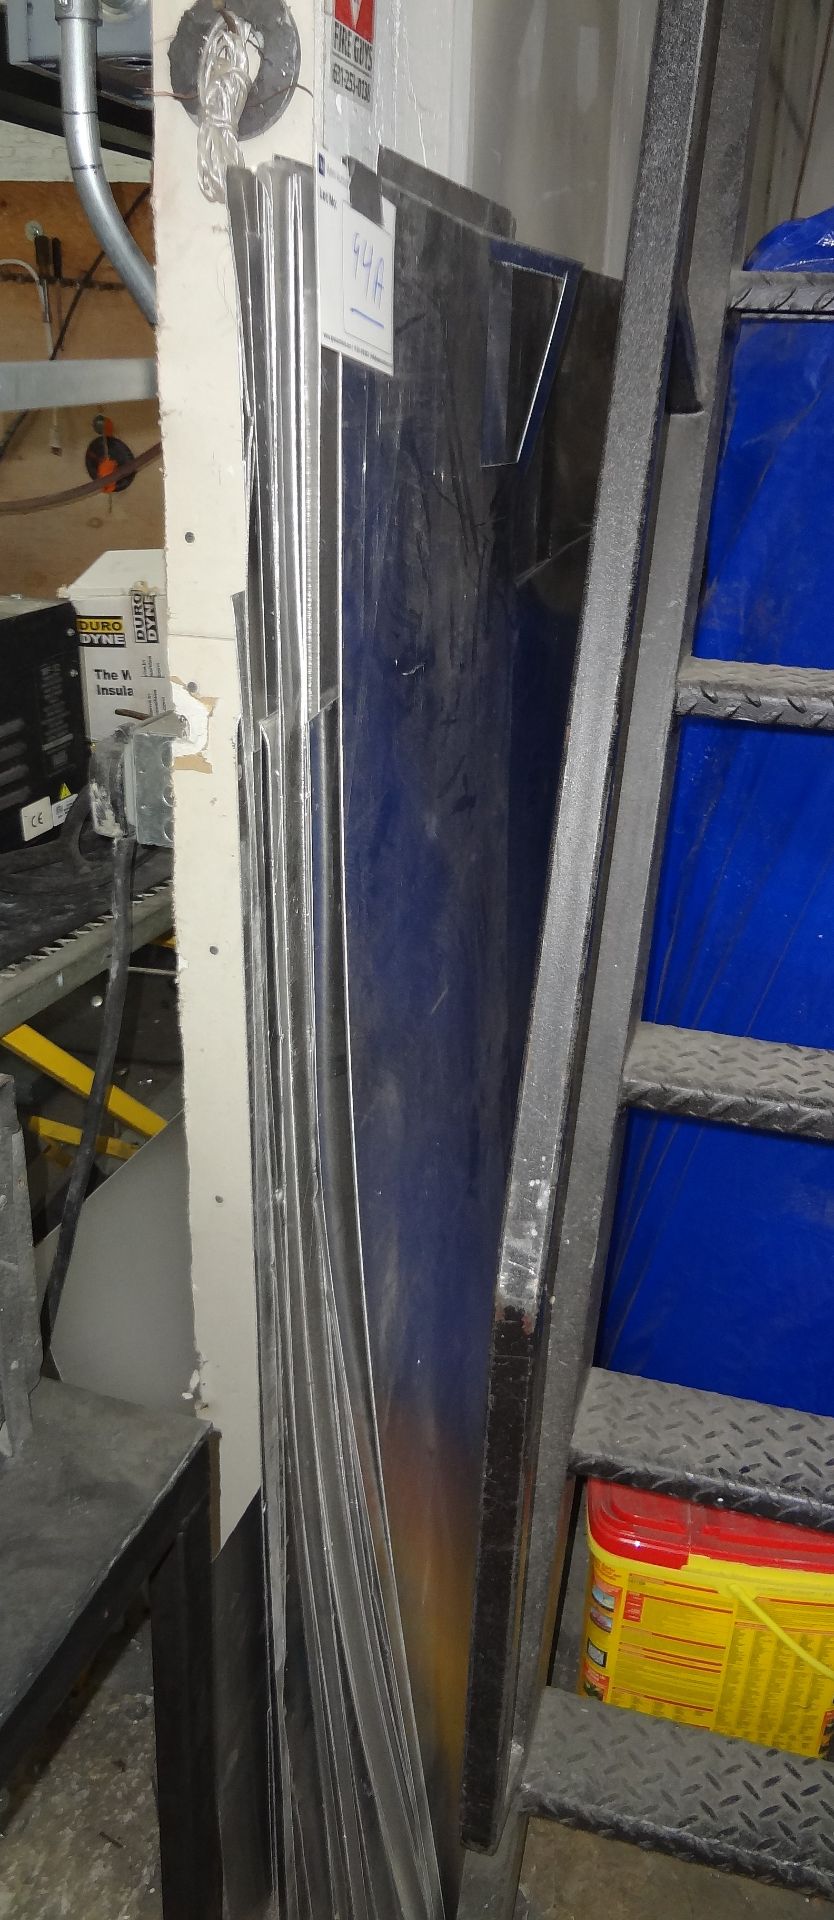 ASSORTED ALUMINUM SHEETS, UP TO 4' X 8' (AGAINST WALL UNDER MEZZANINE)